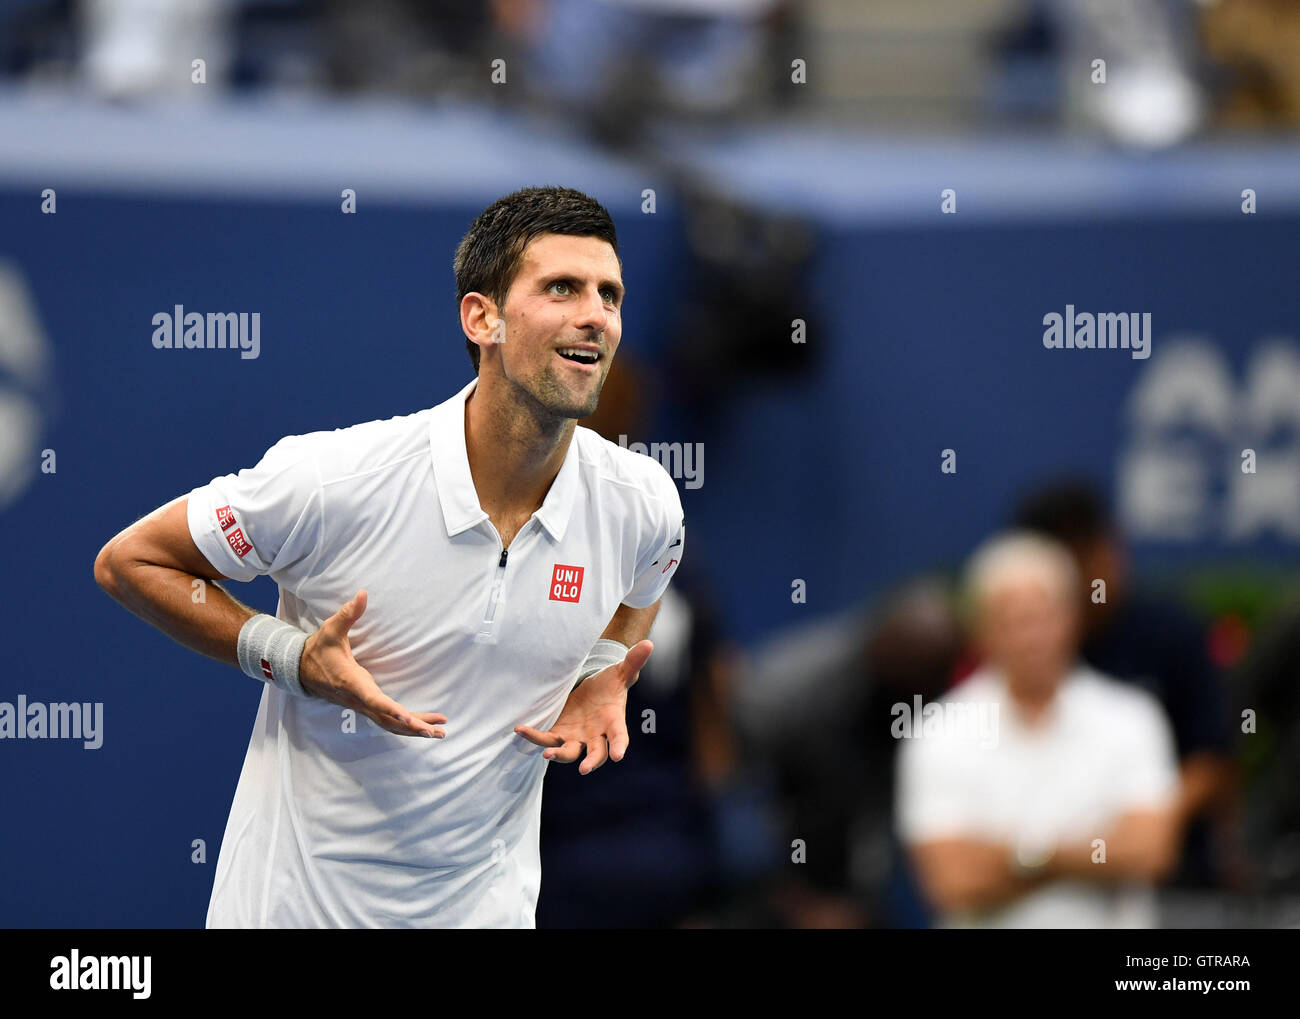 New York, USA. 9th Sep, 2016. Novak Djokovic of Serbia celebrates his victory over Gael Monfils of France during men's singles semi-final match at the 2016 U.S. Open in New York, the United States, Sept. 9, 2016. Djokovic won 3-1. Credit:  Yin Bogu/Xinhua/Alamy Live News Stock Photo